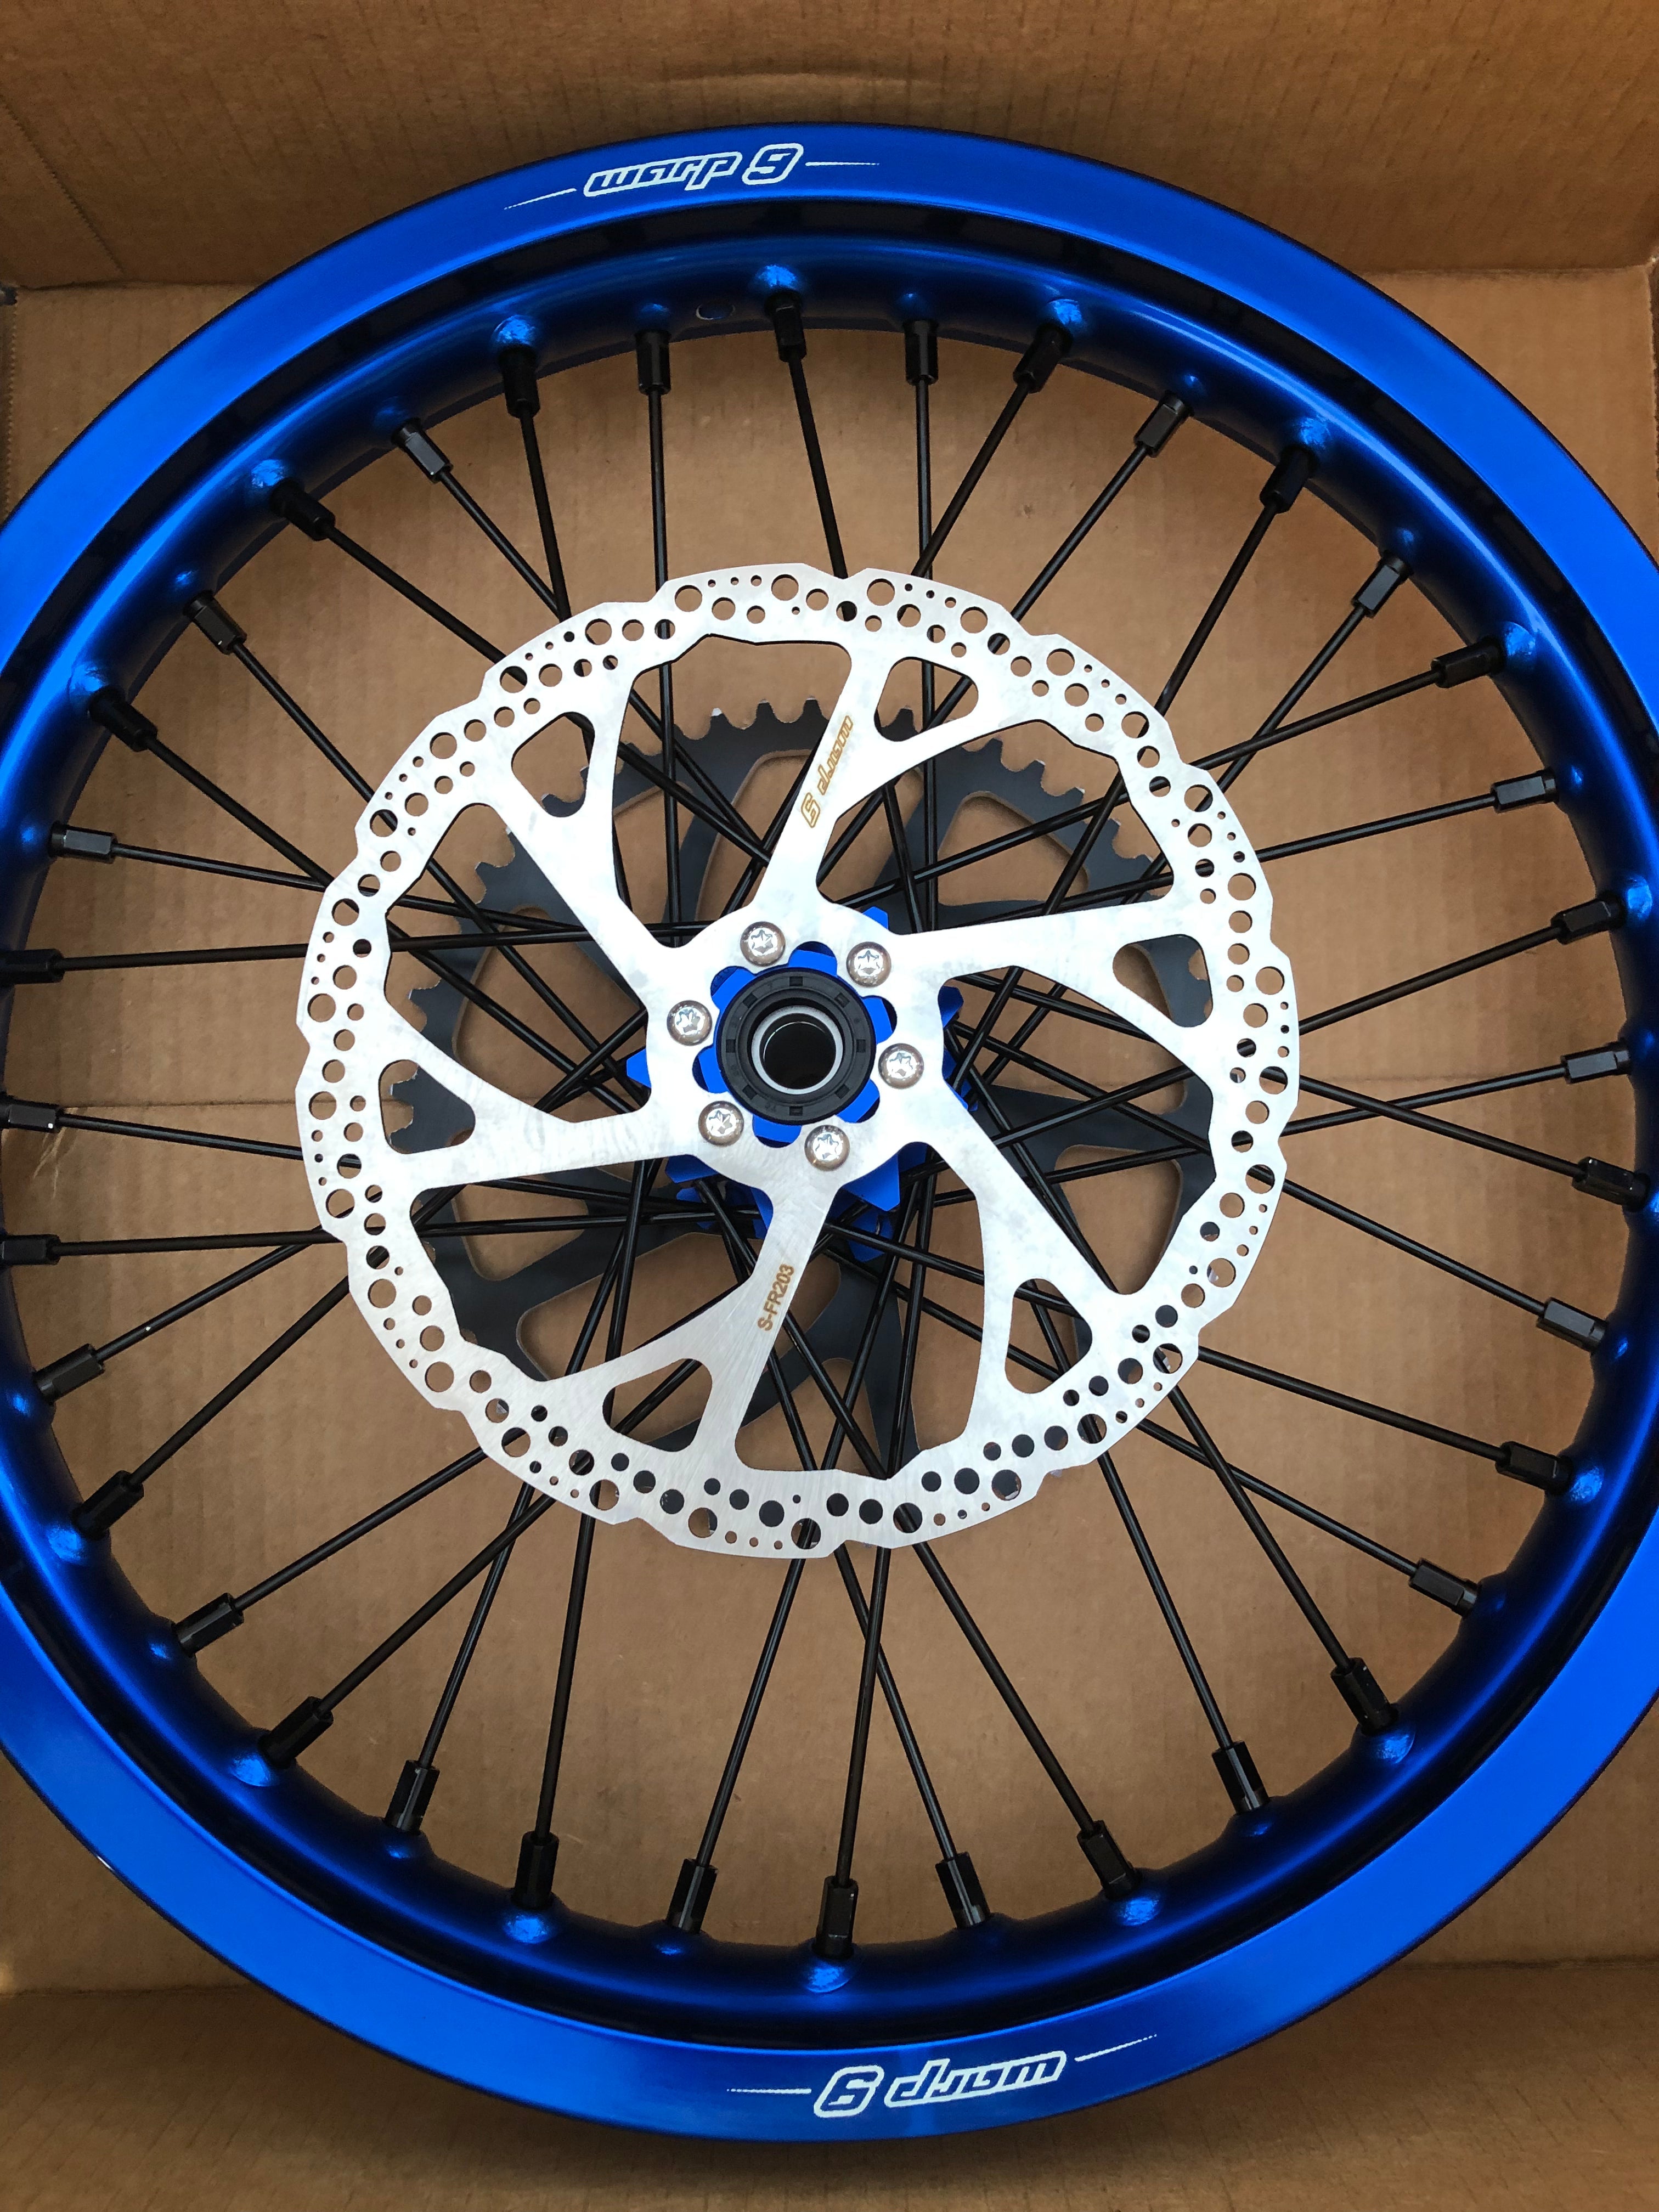 16/19 Complete Wheel & Tire Combo for Surron Light Bee and E Ride ProSS - Warp 9